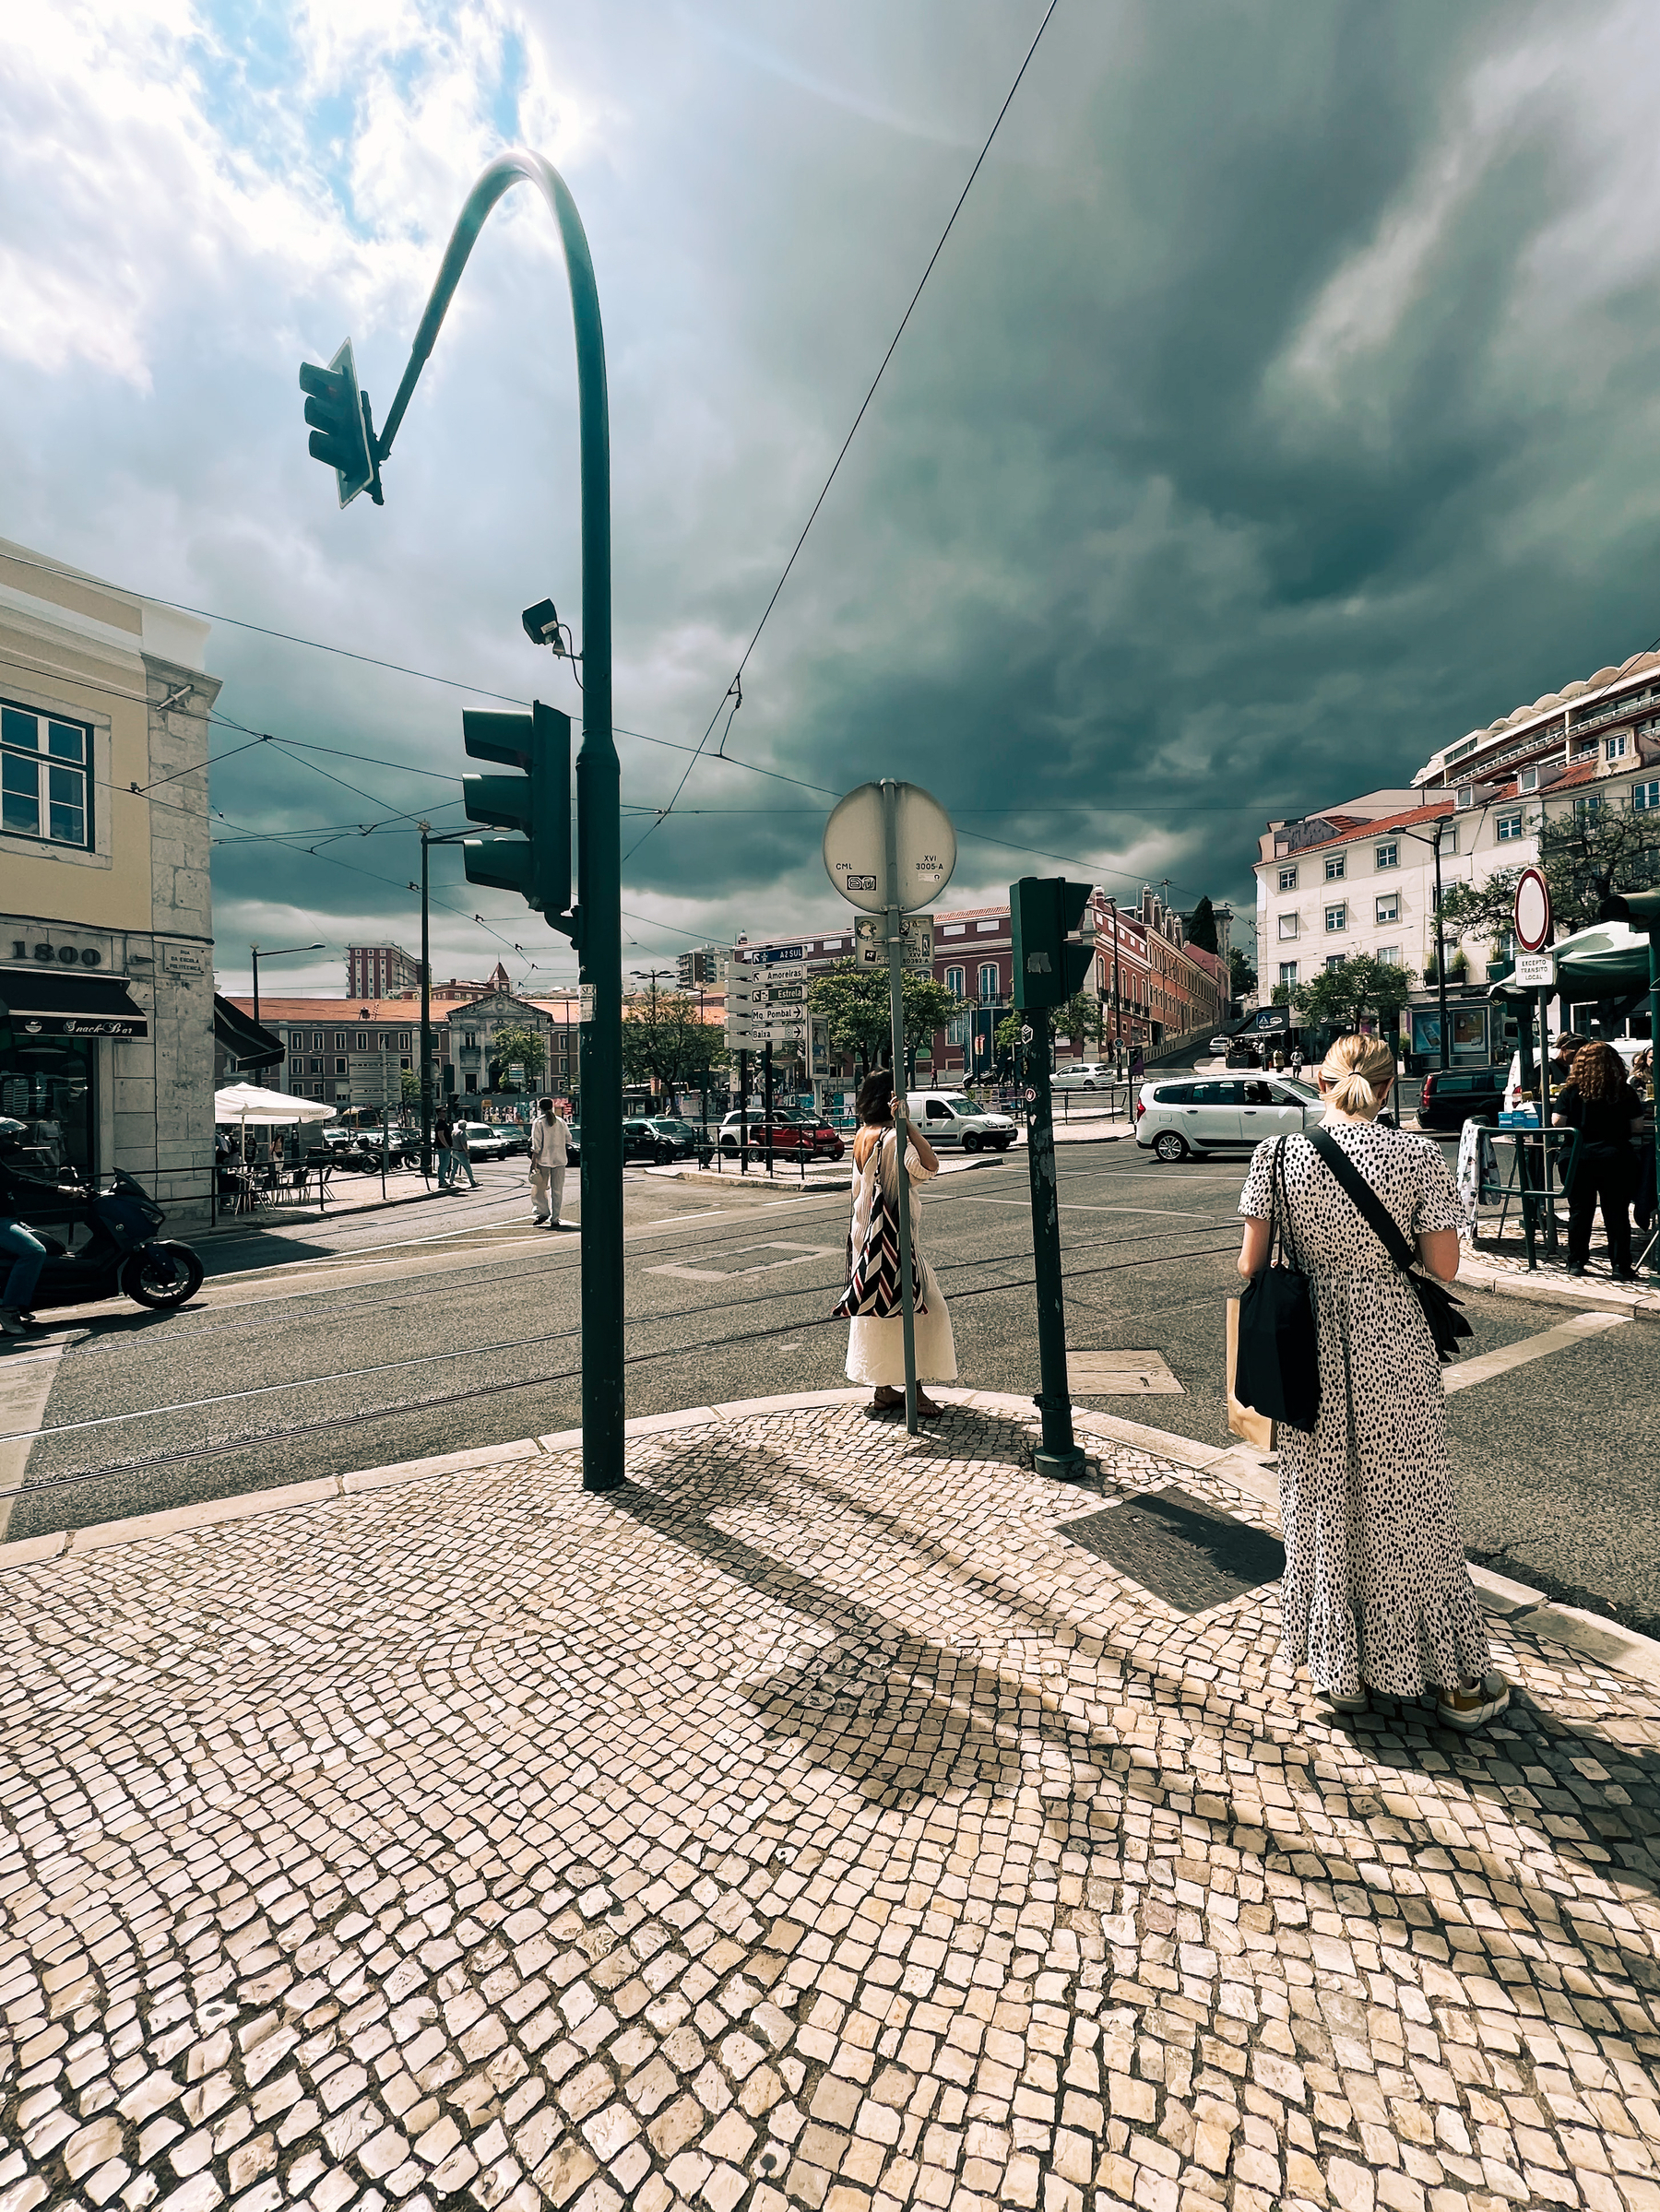 Stormy clouds over the city. A street corner, people waiting to cross. 